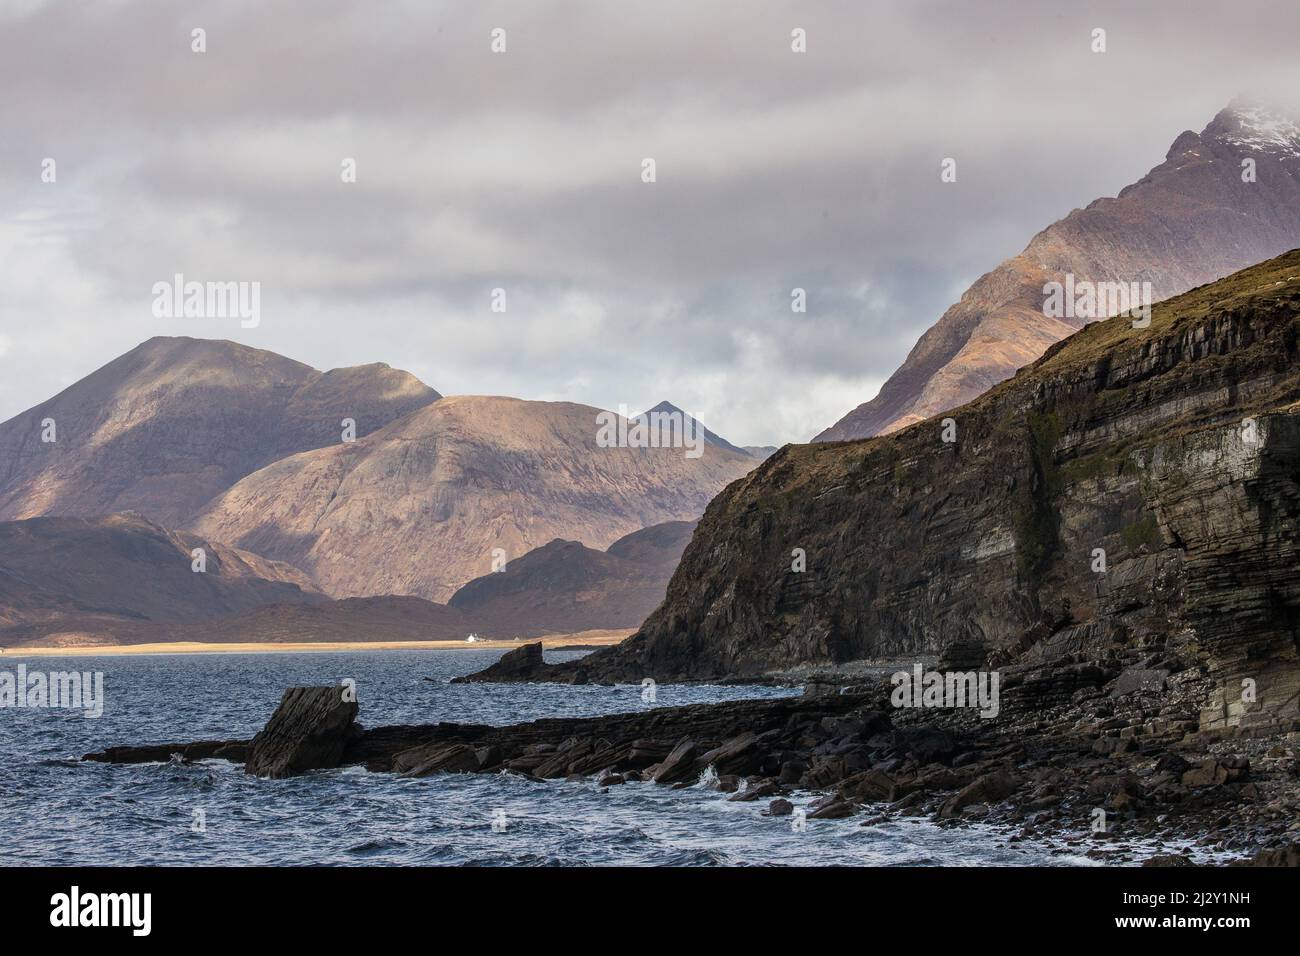 View from Elgol on the Cuilins mountain range, Isle of Skye, Scotland, UK Stock Photo